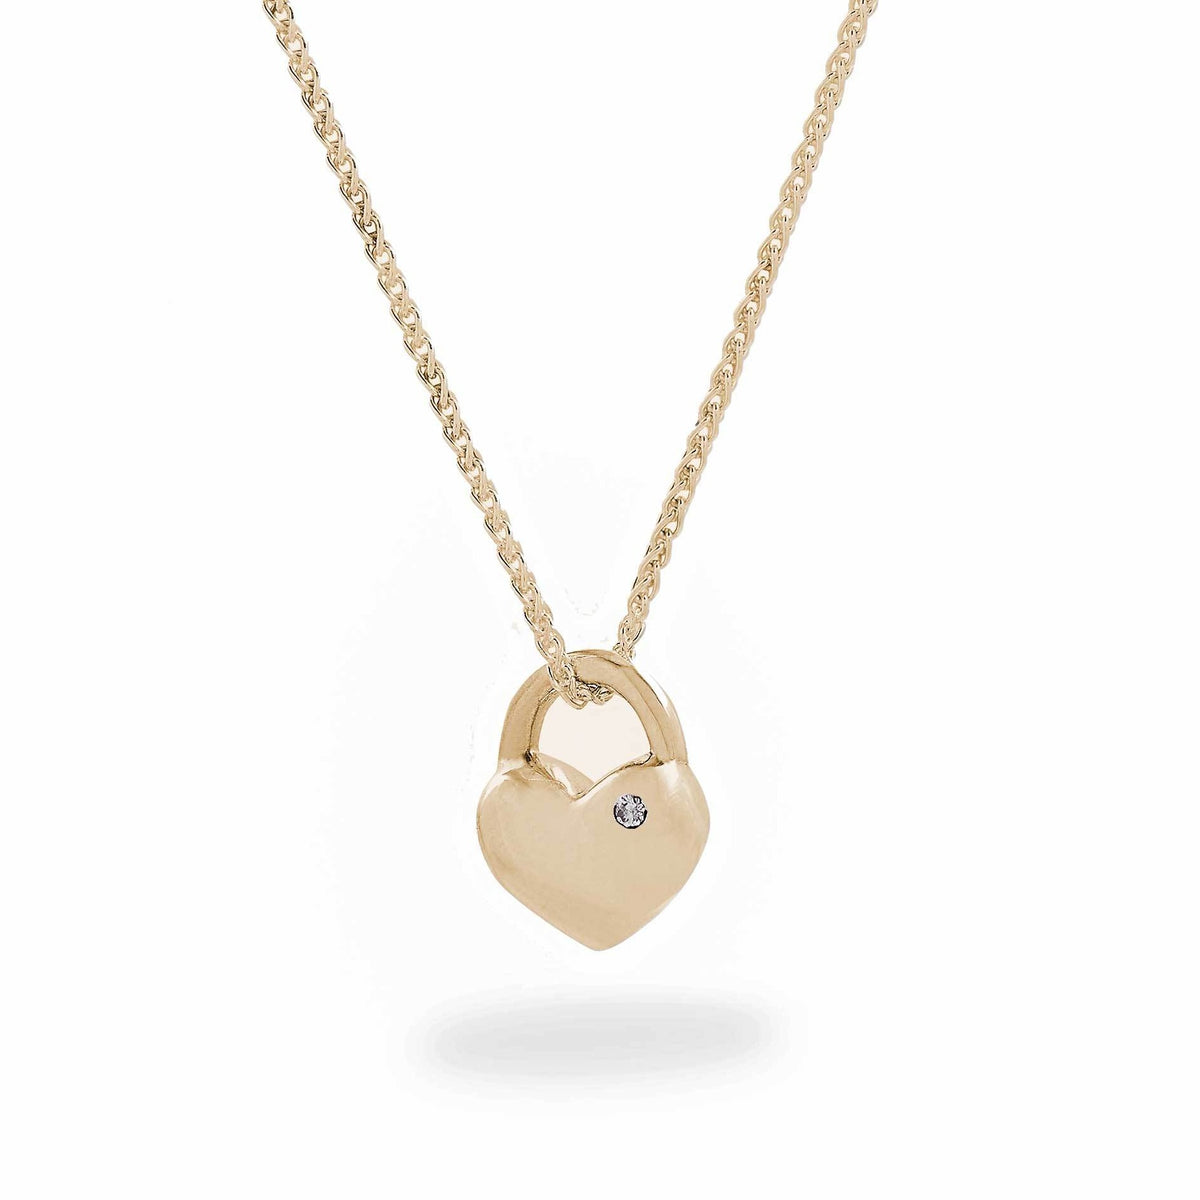 solid gold heart necklace with diamond scarlett jewellery UK christmas gift for her